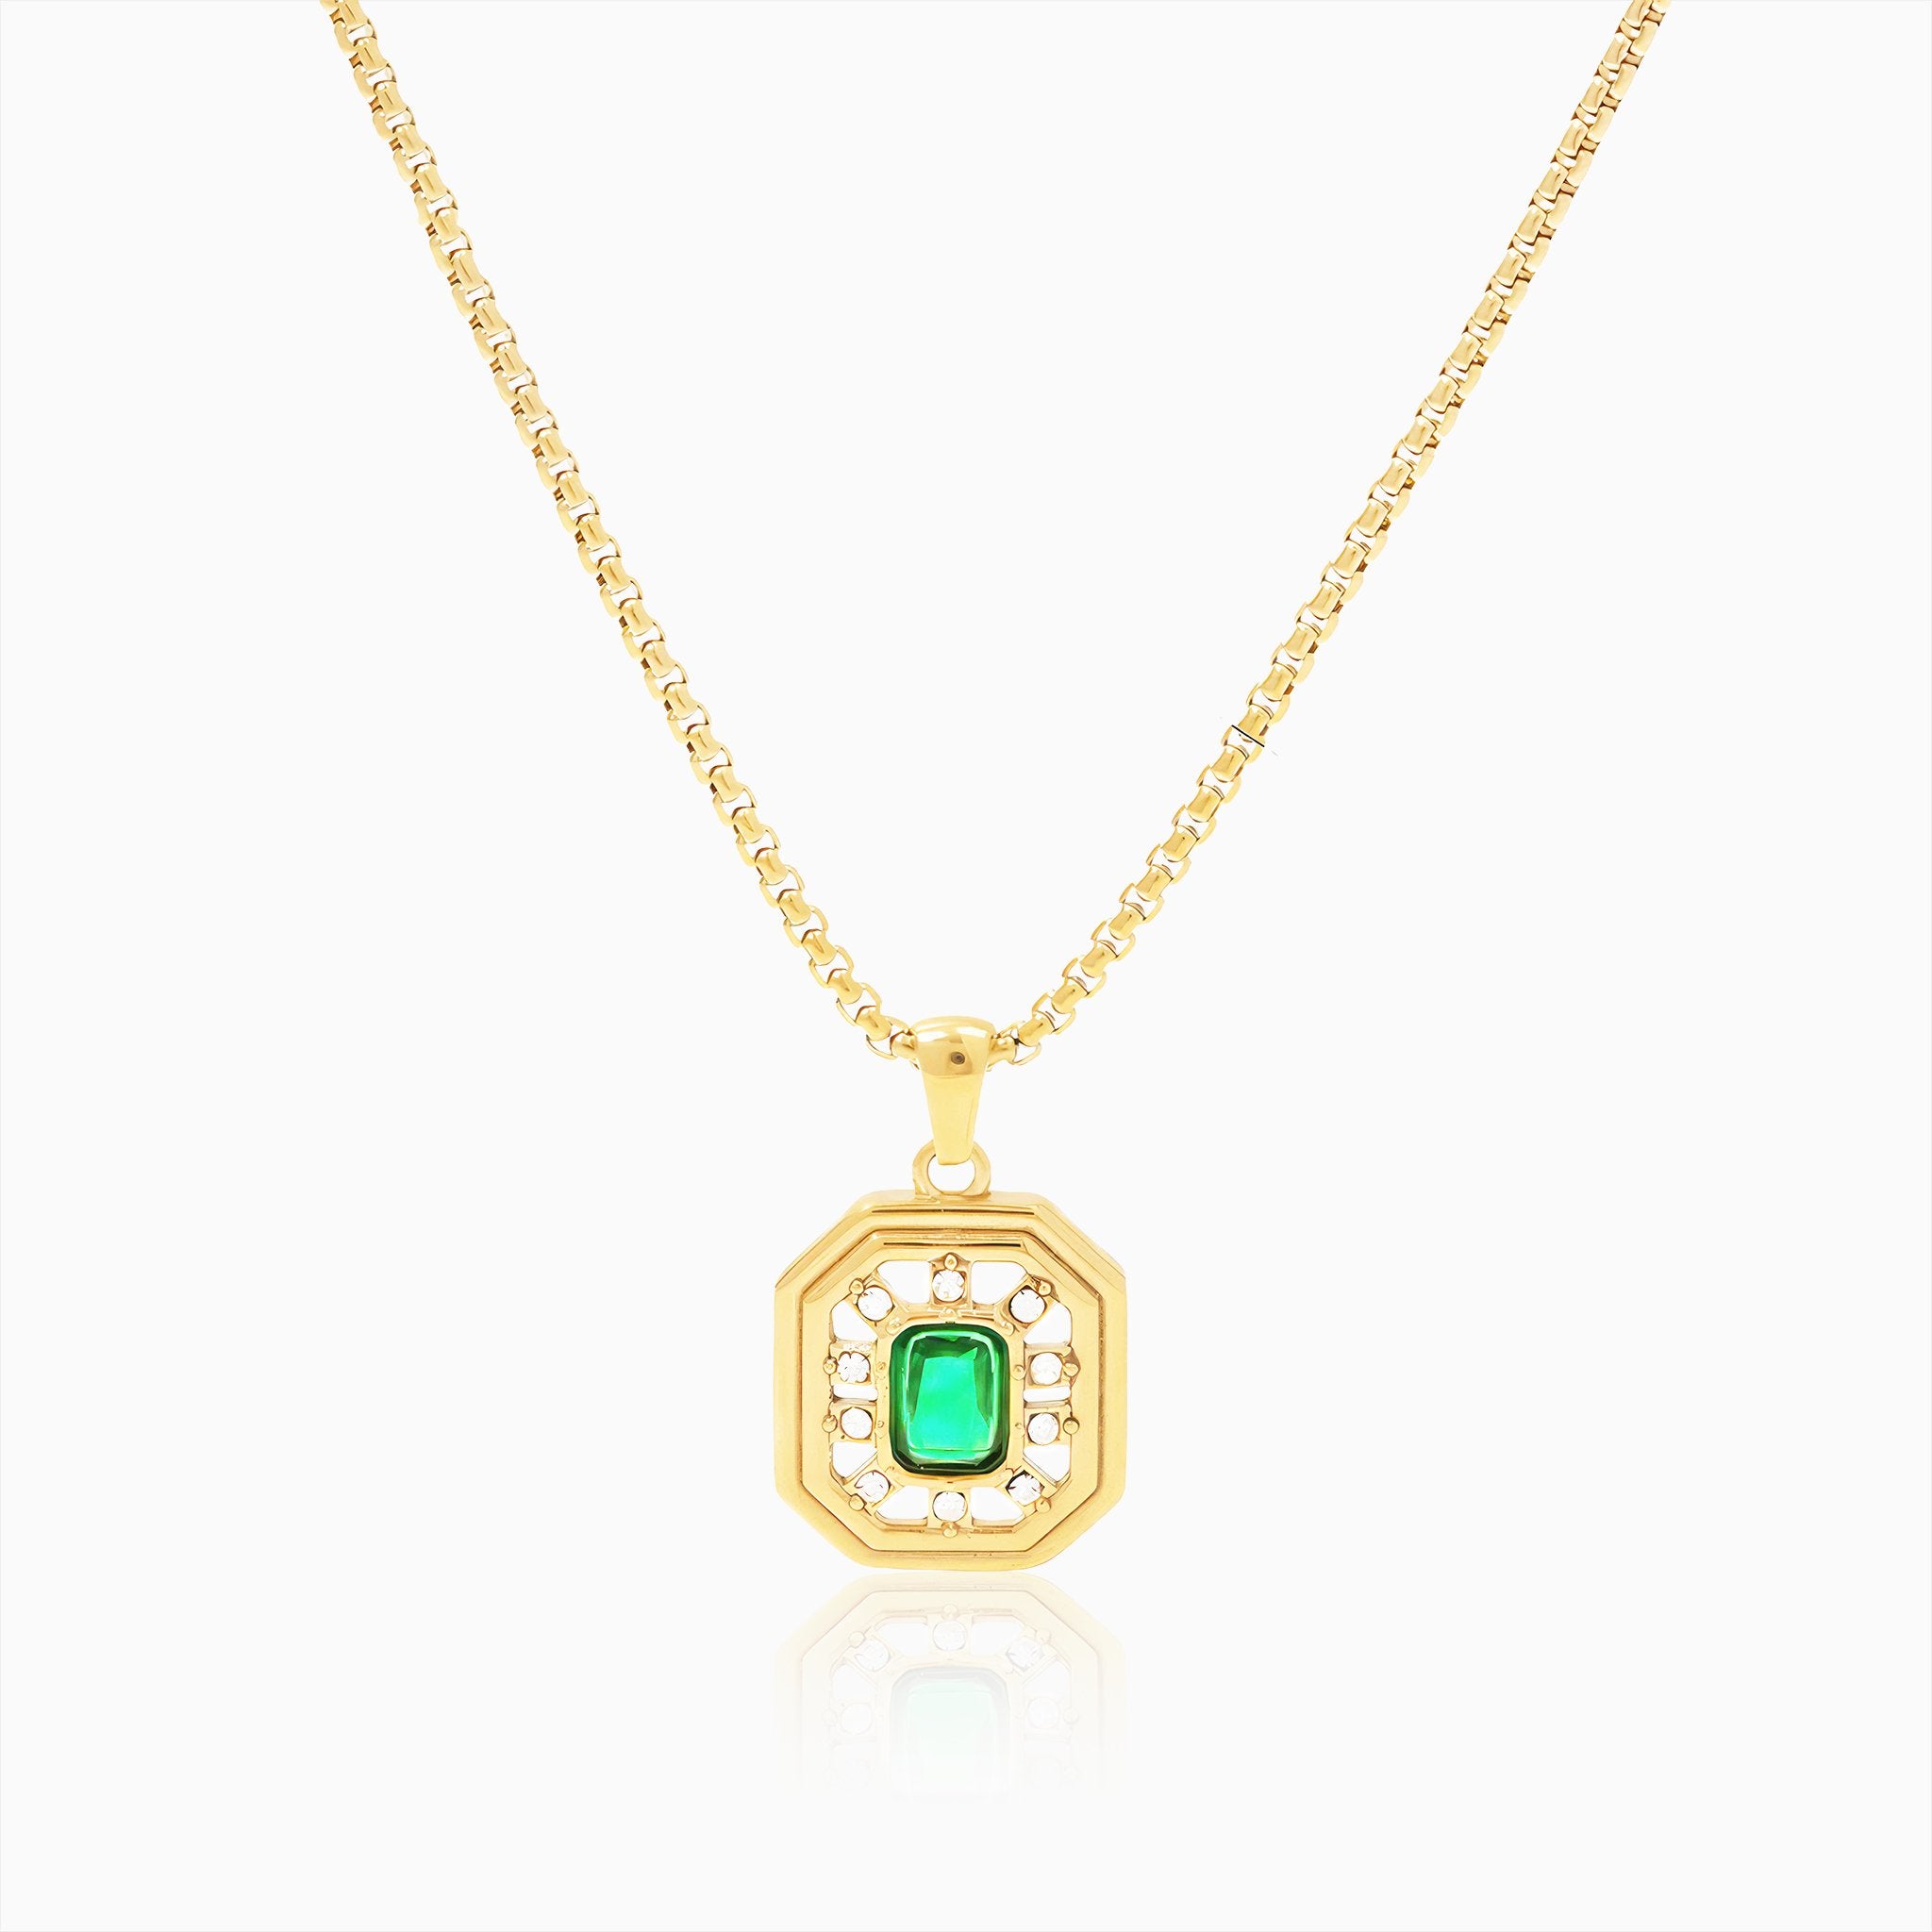 Elegant Green Gemstone Necklace - Nobbier - Necklace - 18K Gold And Titanium PVD Coated Jewelry